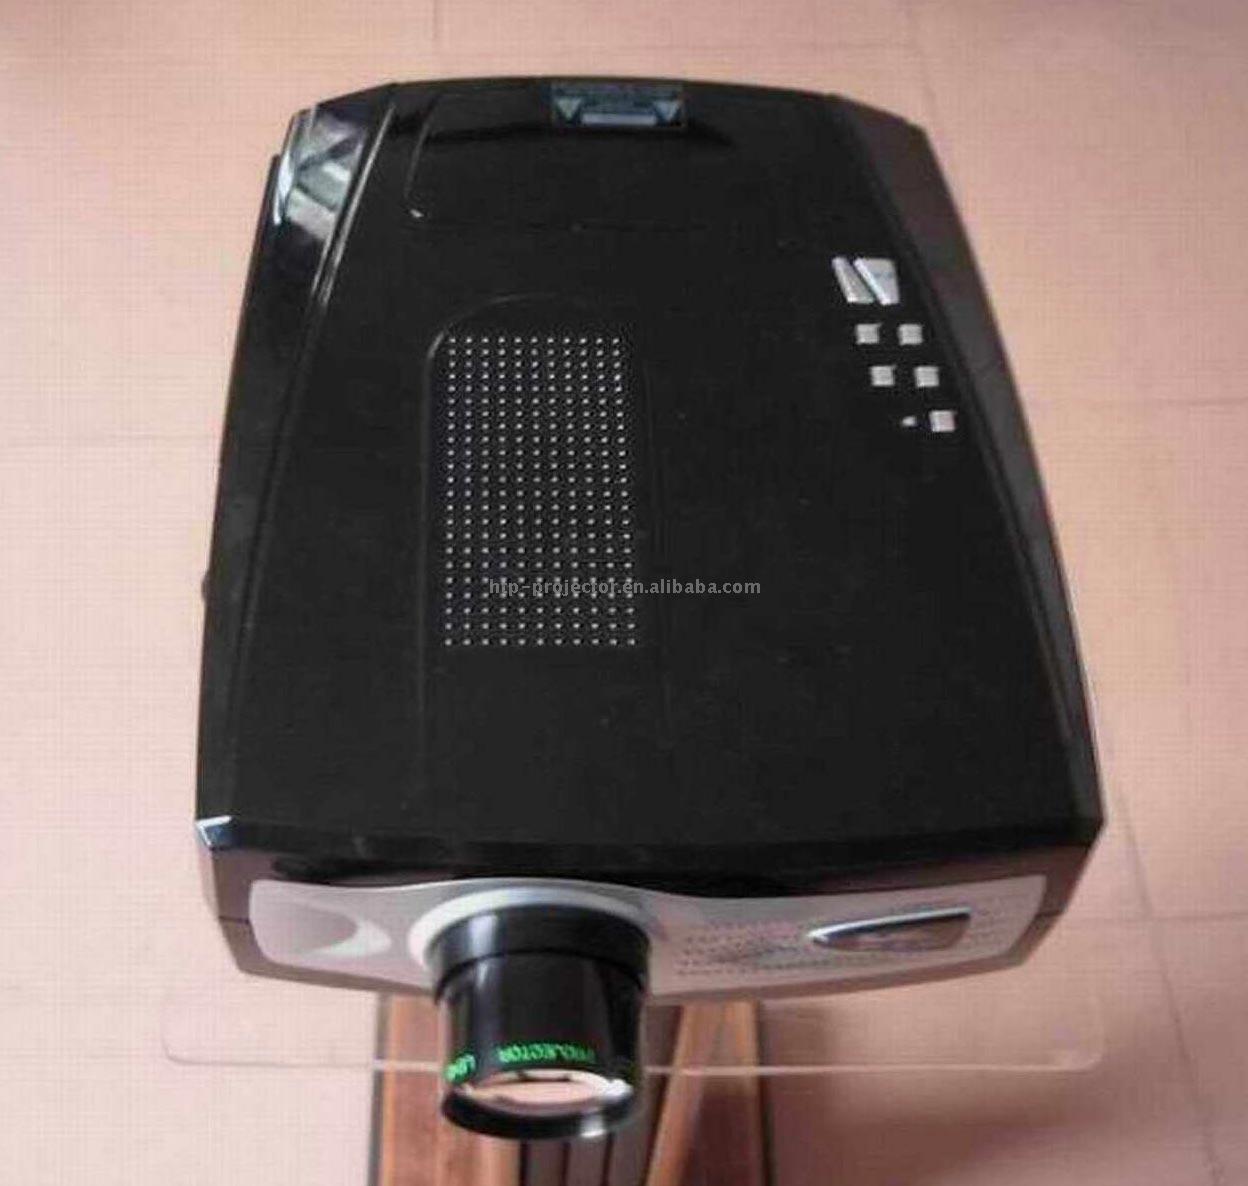  LCD Projector (LCD-проектор)